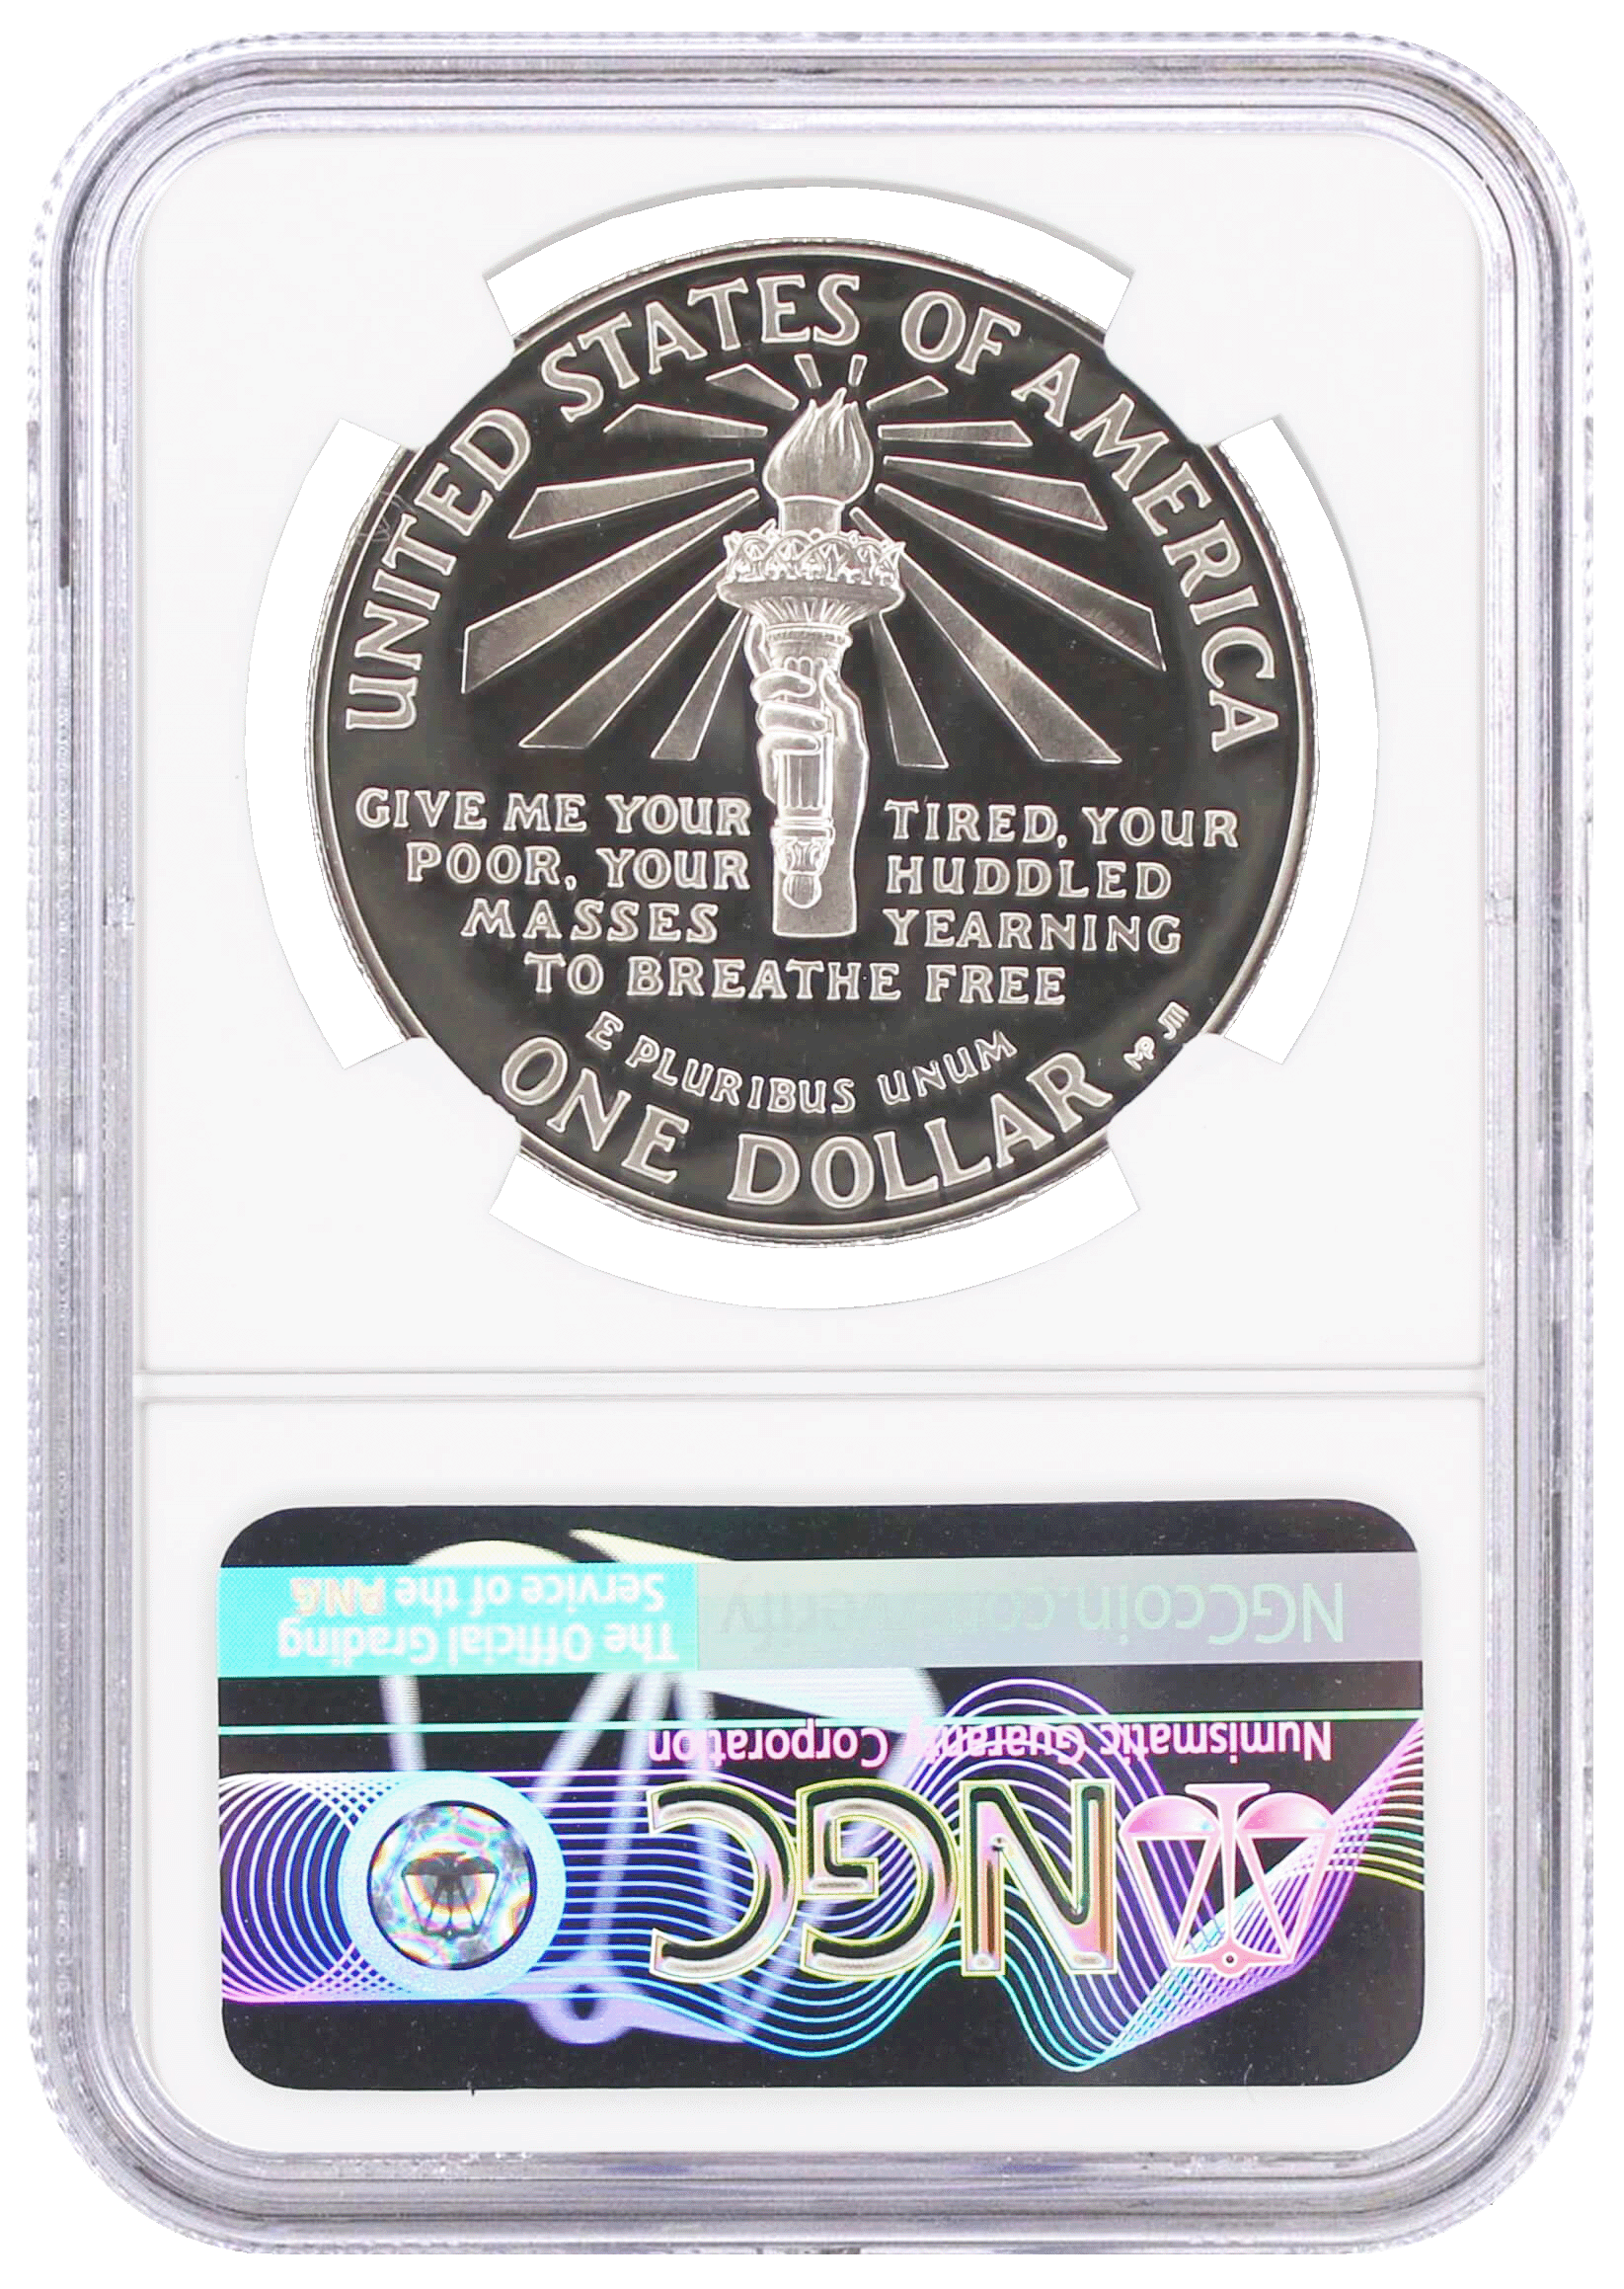 1986 S $1 Proof Silver Statue of Liberty NGC PF70 UCAM Mercanti Signed Mint Engraver Series Masters Collection